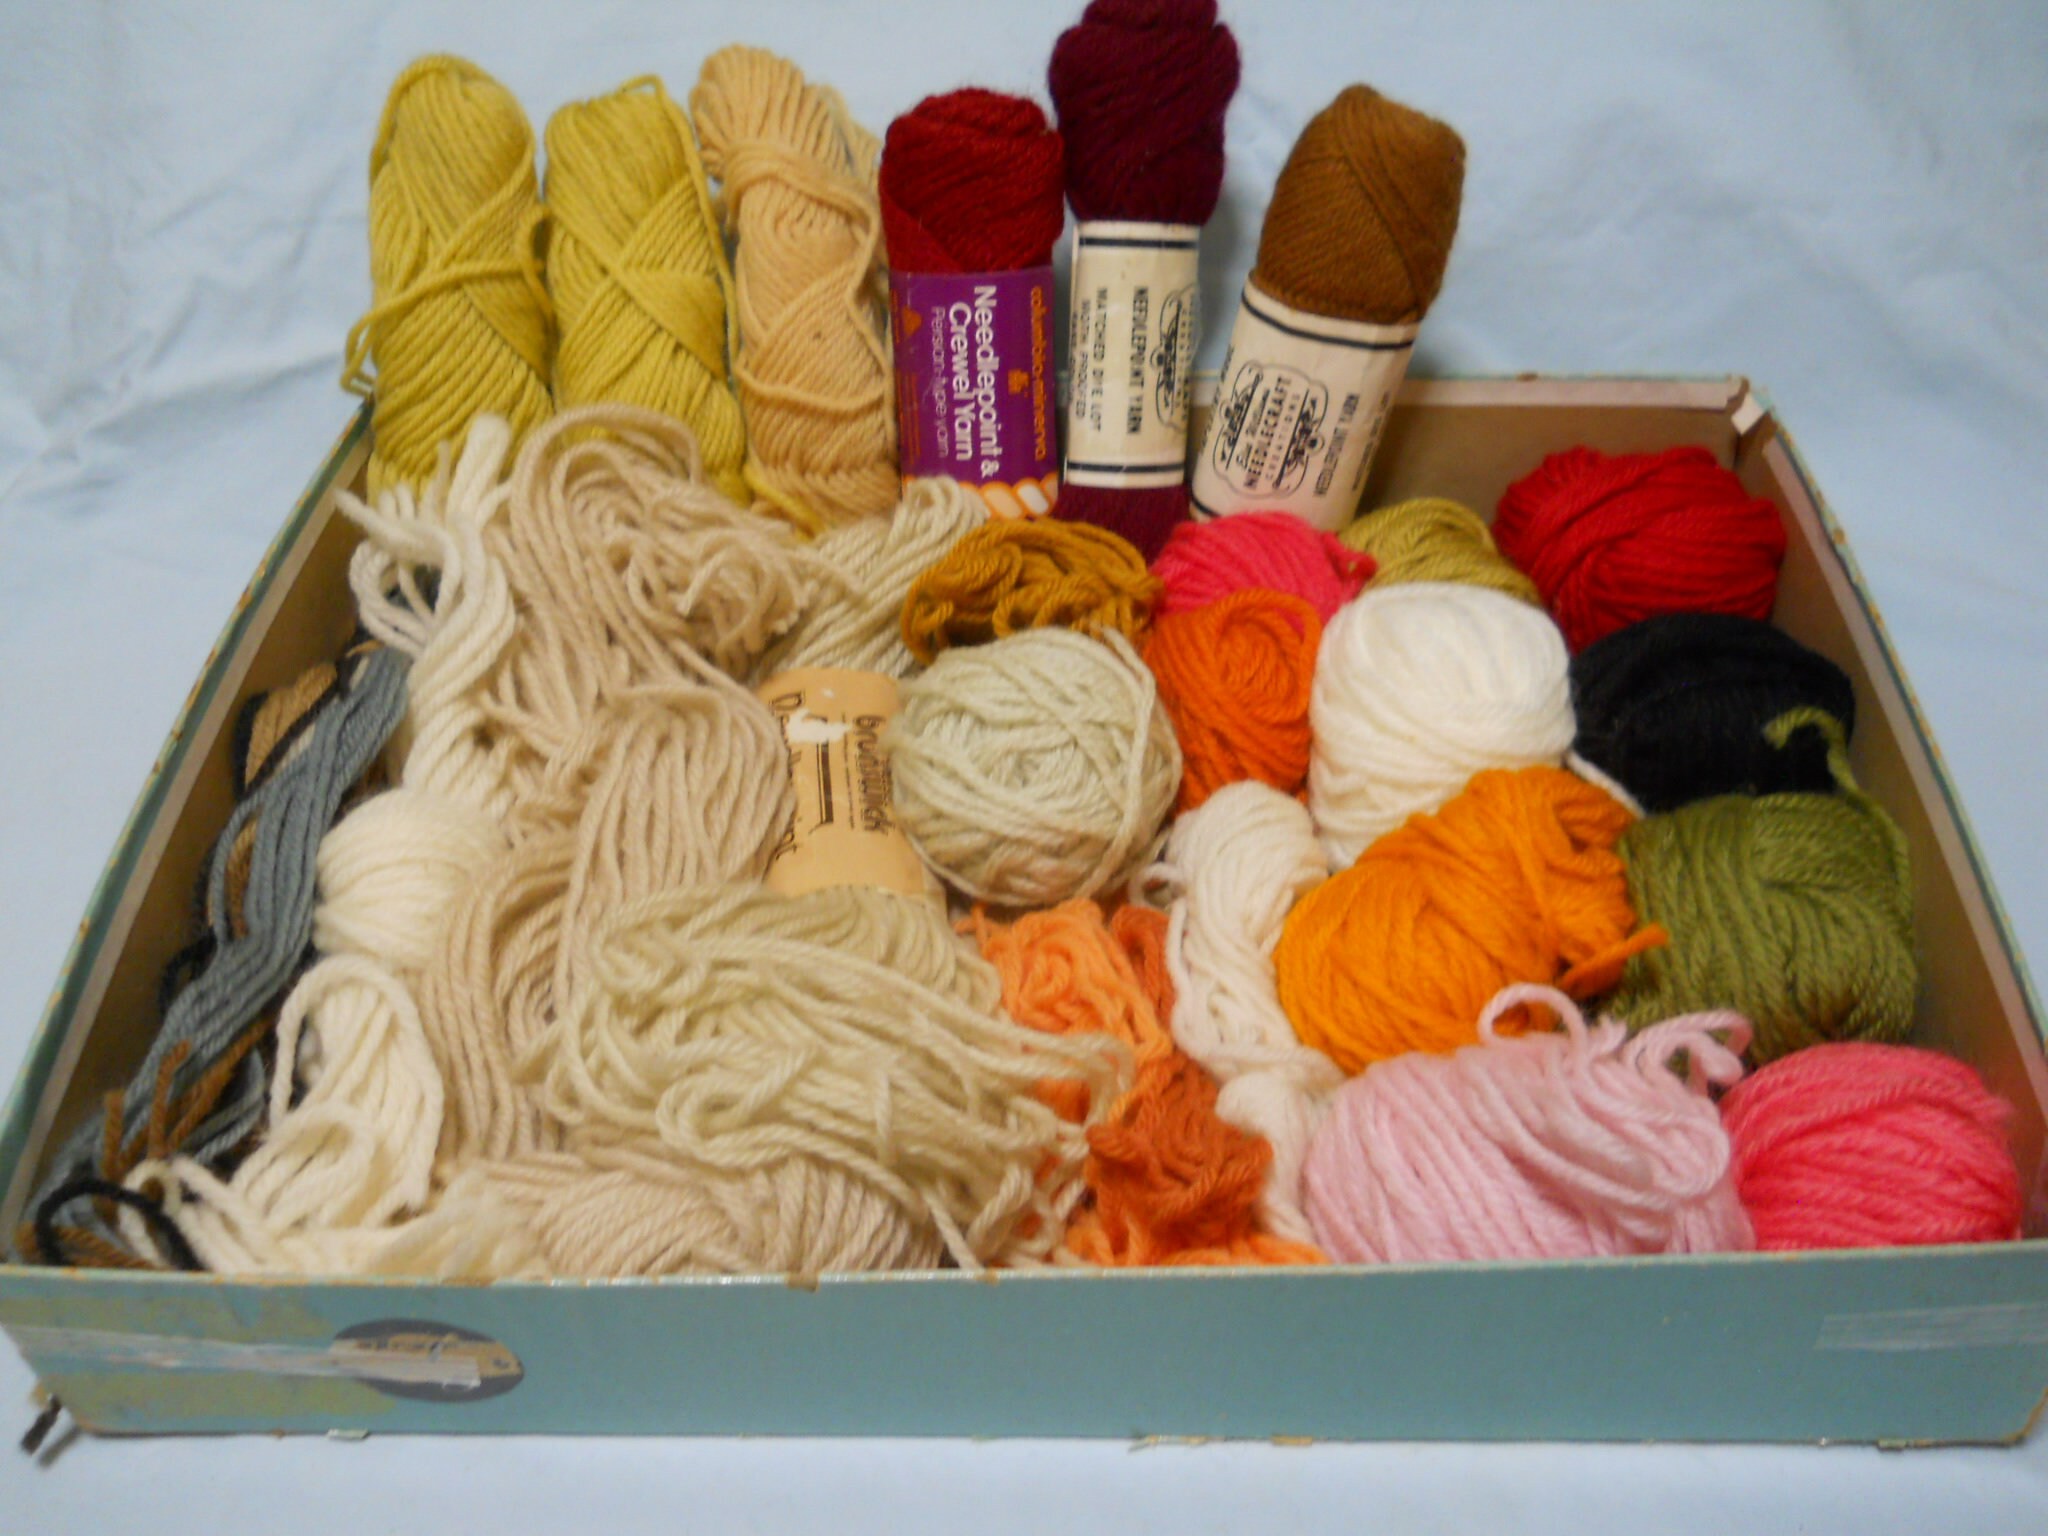 Lot of wool Needlepoint/Embroidery thread approximately 20 oz